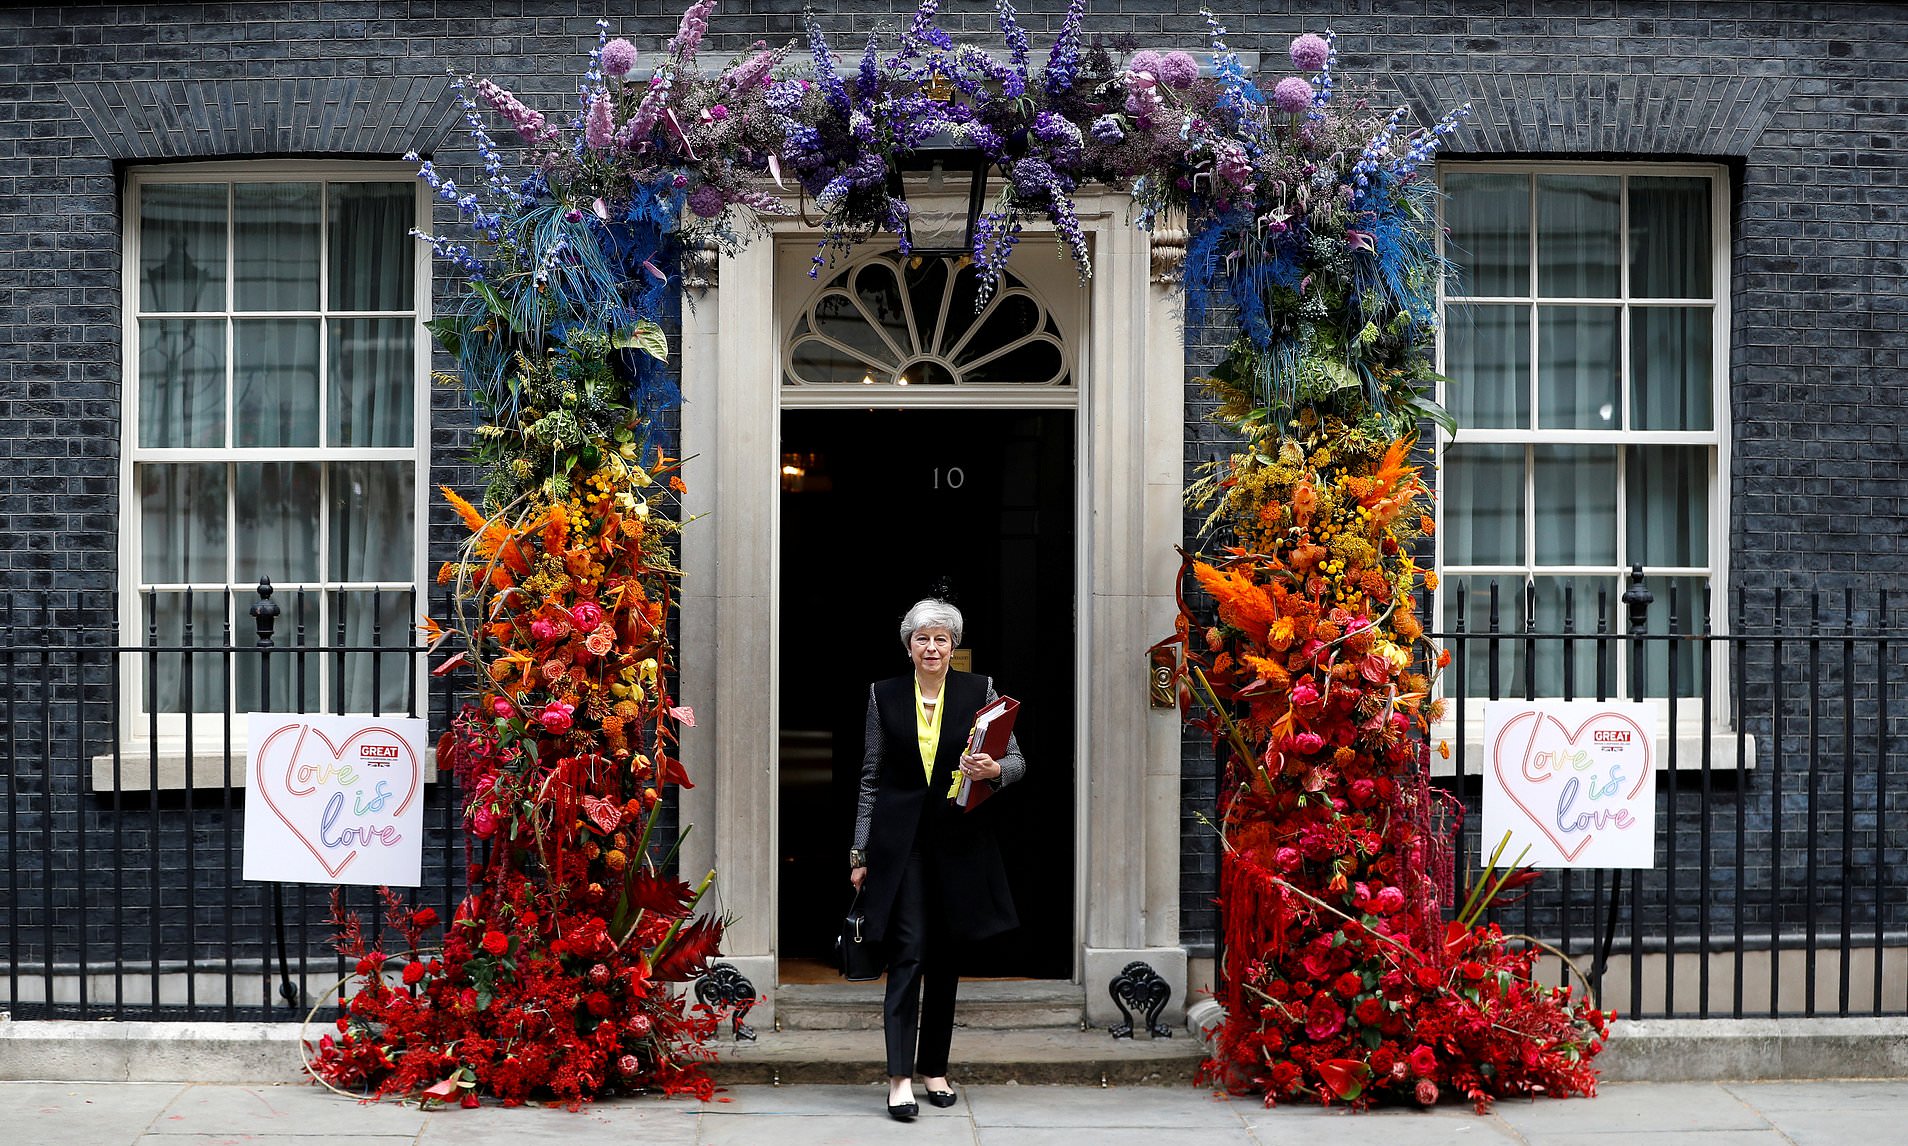 Downing Street, UK. 3rd July 2019. British Prime Minister, Theresa May leaves No 10 Downing Street for Prime Ministers Questions, through an arch of flowers there to celebrate Pride in London. Credit: Thomas Bowles/Alamy Live News